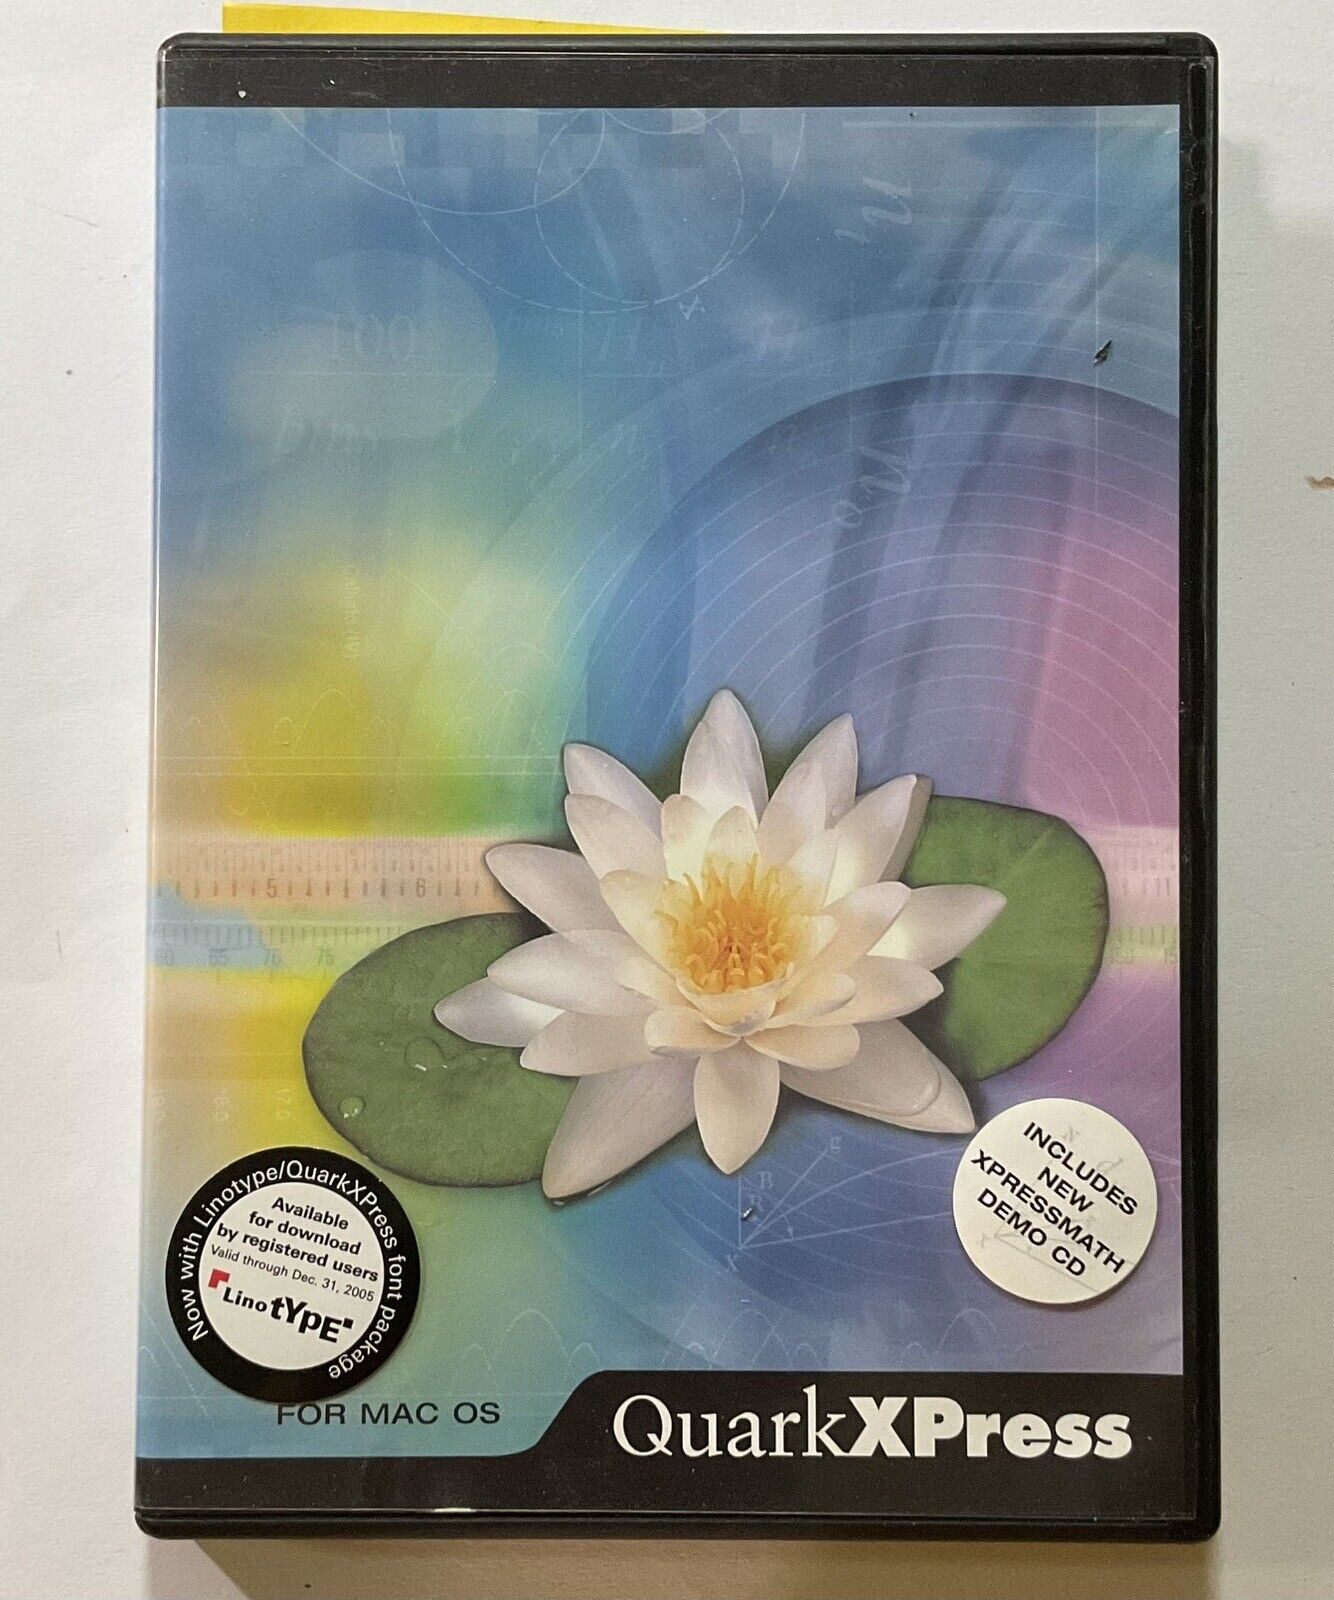 QuarkXPress 6.1 + 6.5 Updater MAC Full Versions Upgradeable, PREVIOUSLY USED.